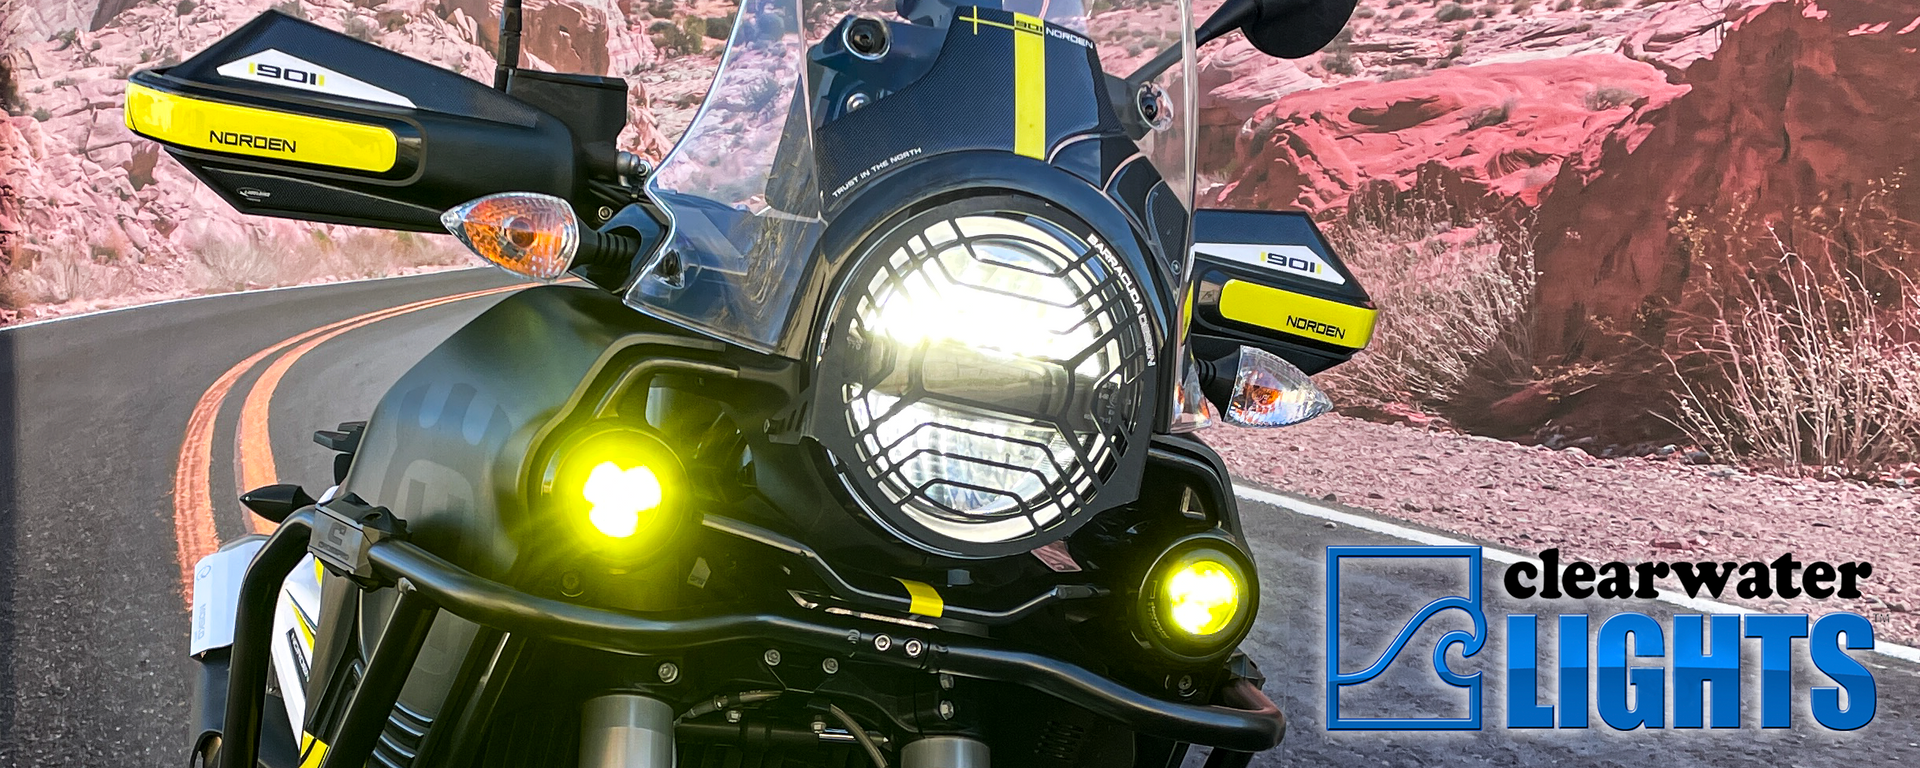 Clearwater Lights LED Motorcycle Lights and Off-road Vehicle